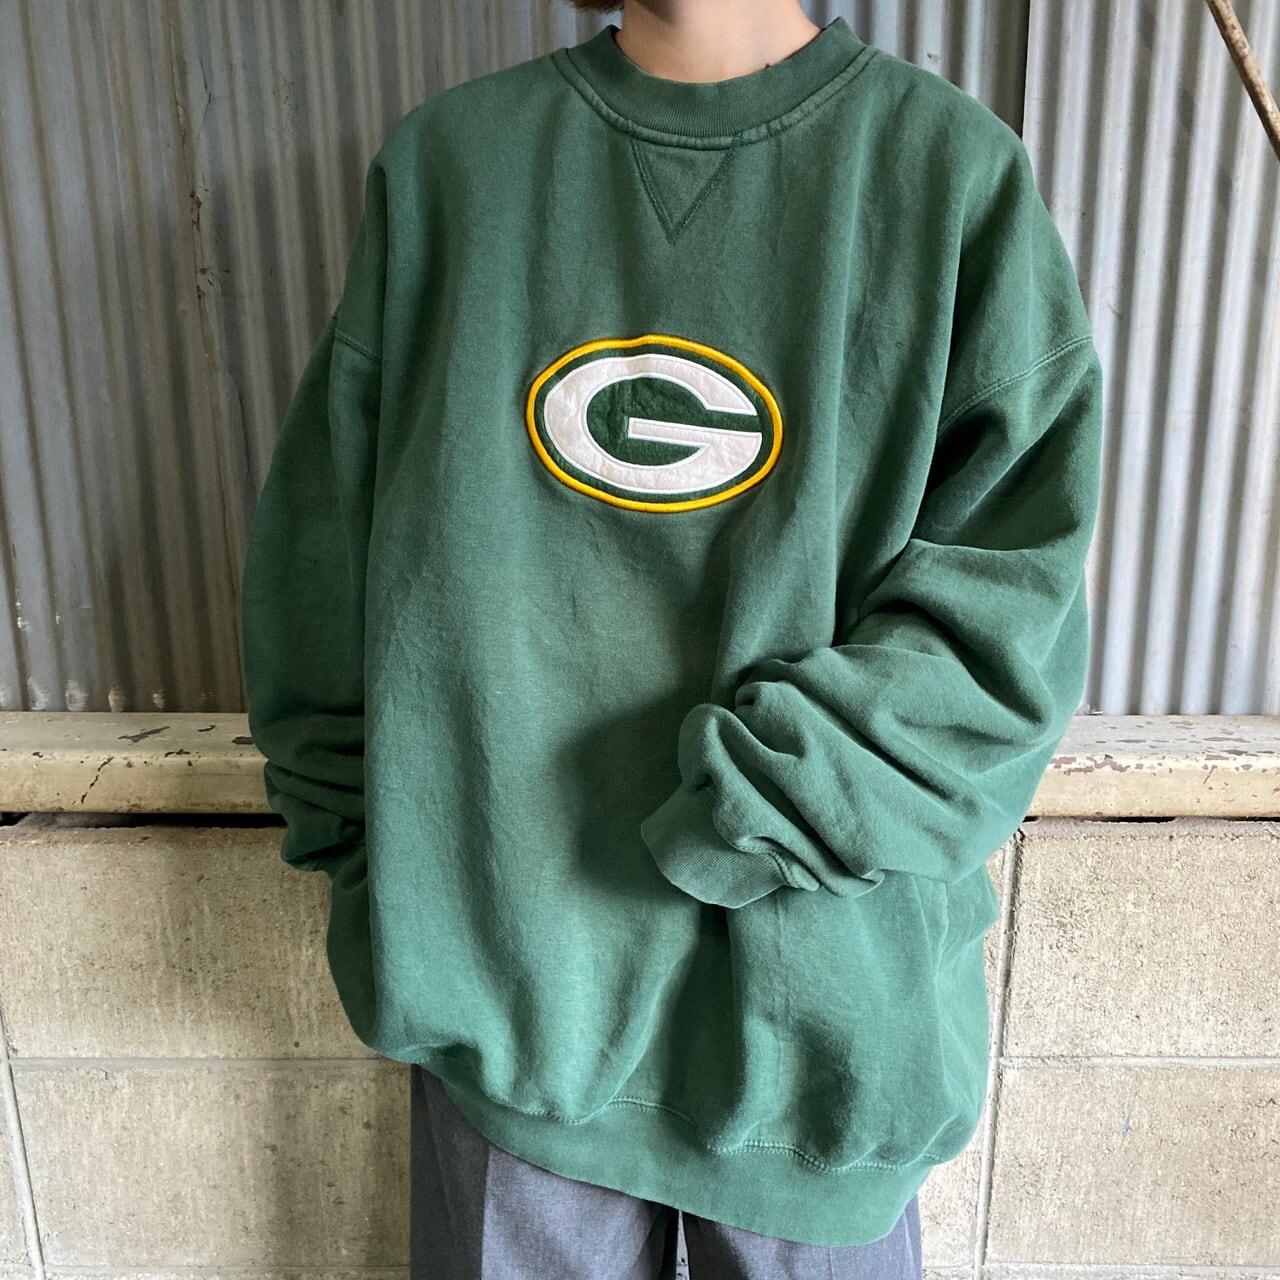 90s NFL packers パッガーズ アメフト スウェット グリーン